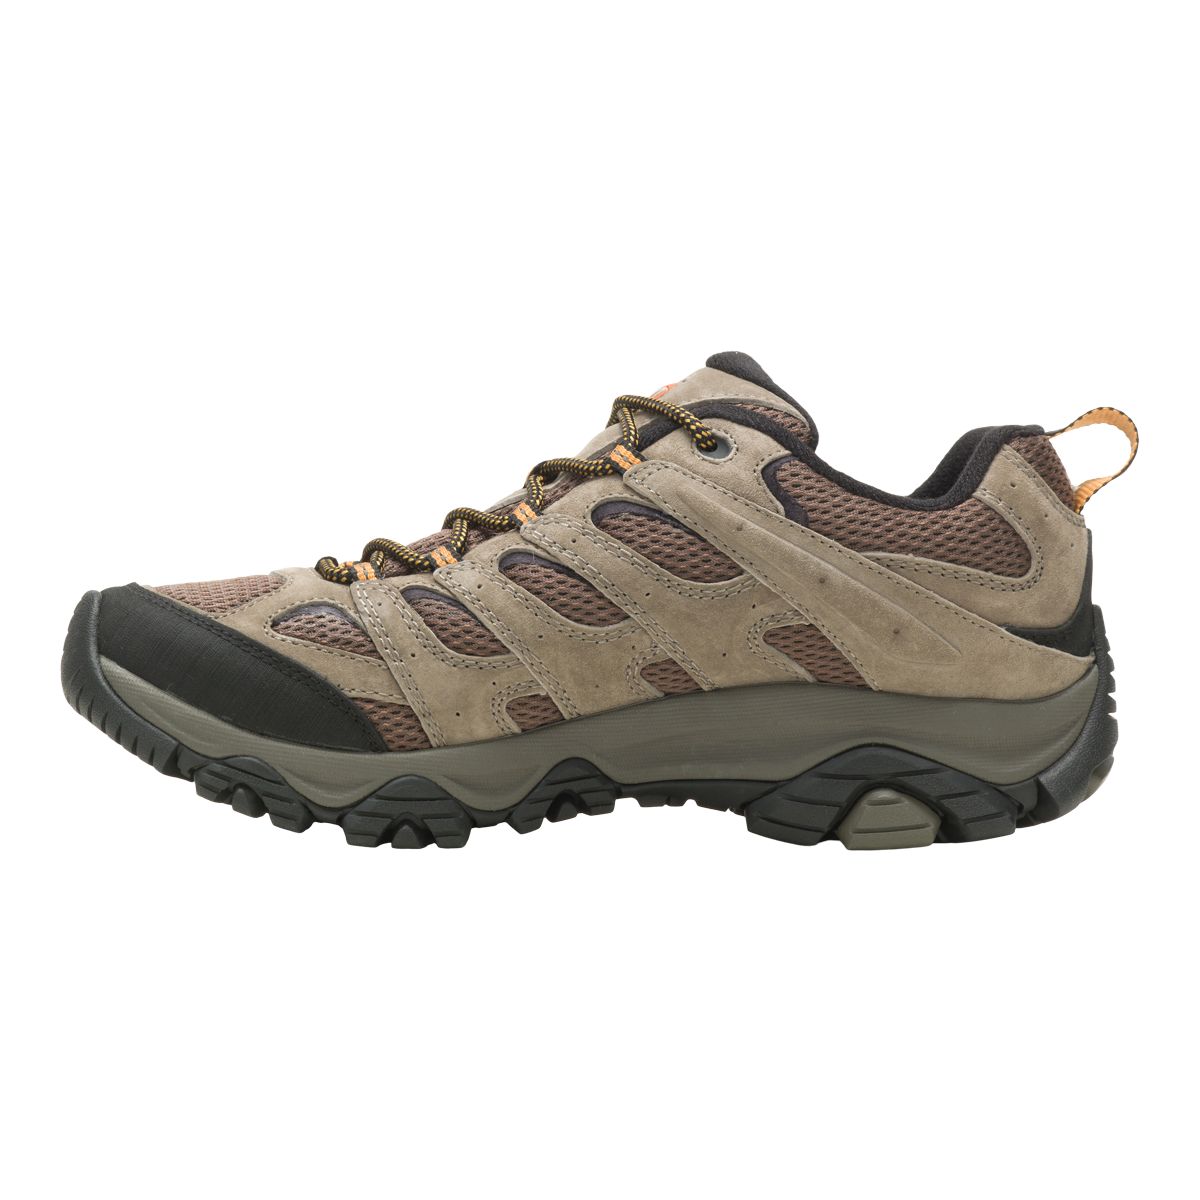 Merrell Men's Moab 3 Wide Leather Hiking Boots